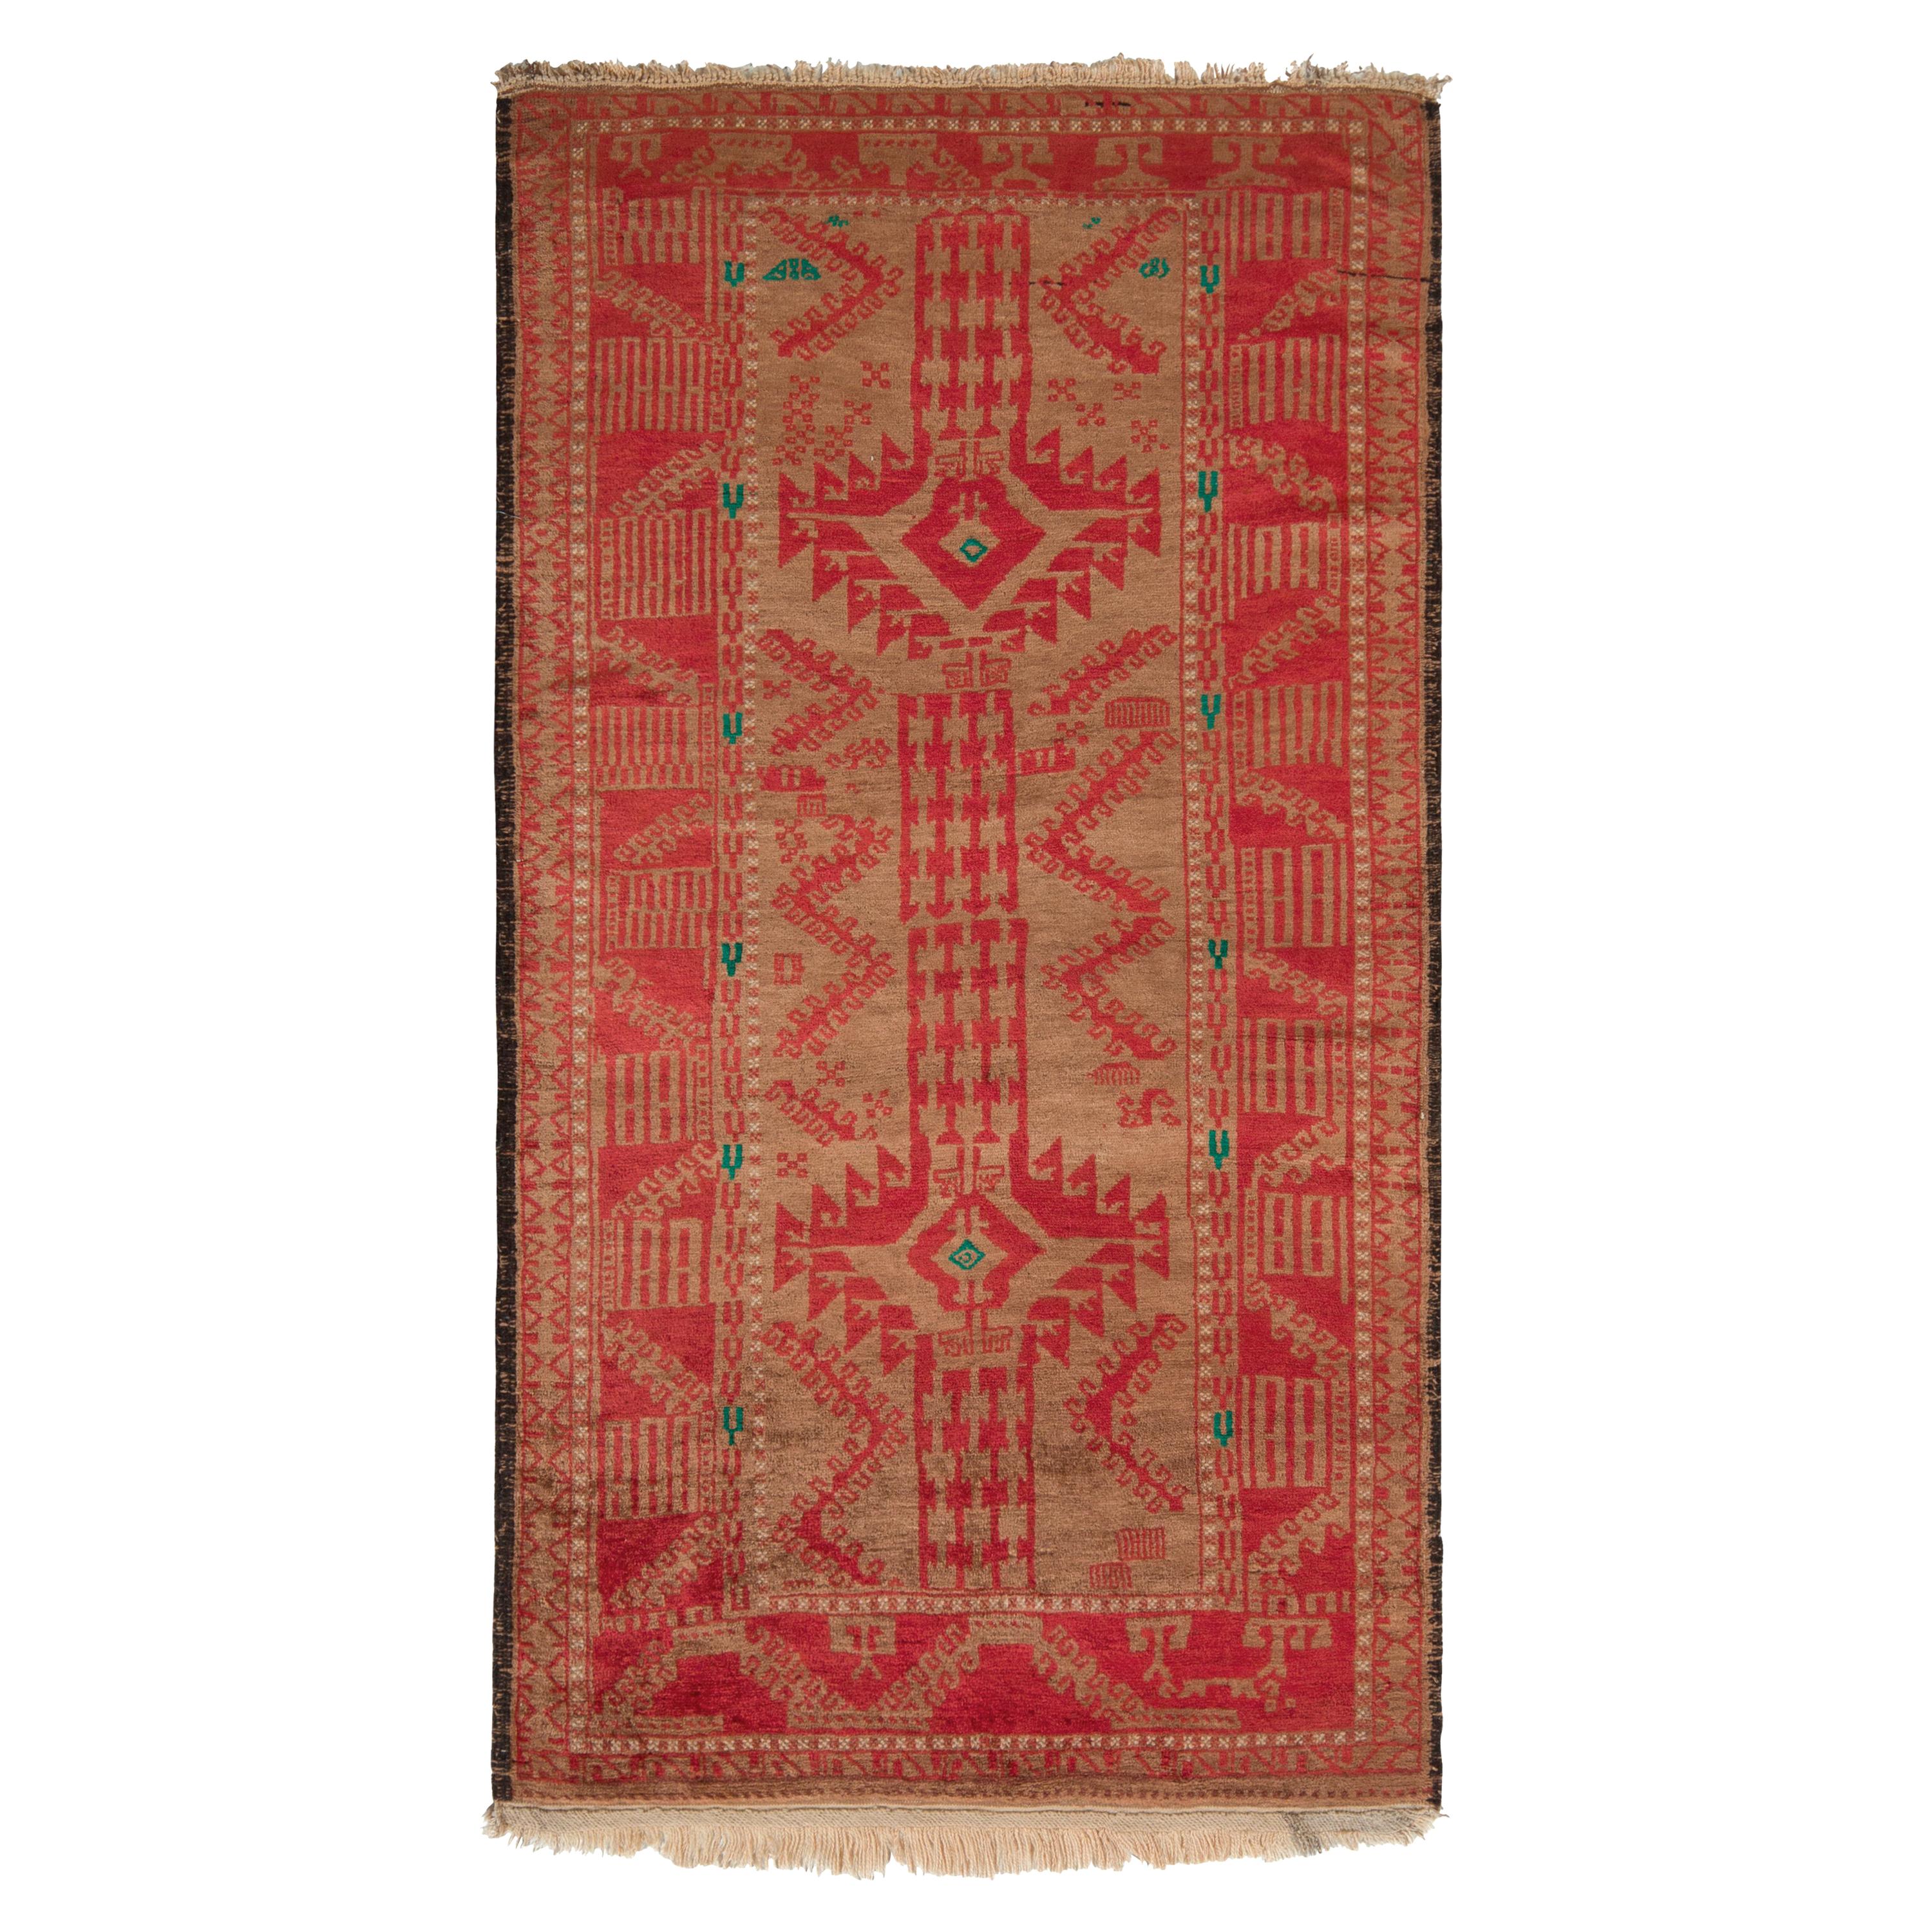 Hand-Knotted Antique Baluch Rug in Red and Beige-Brown Persian Tribal Pattern